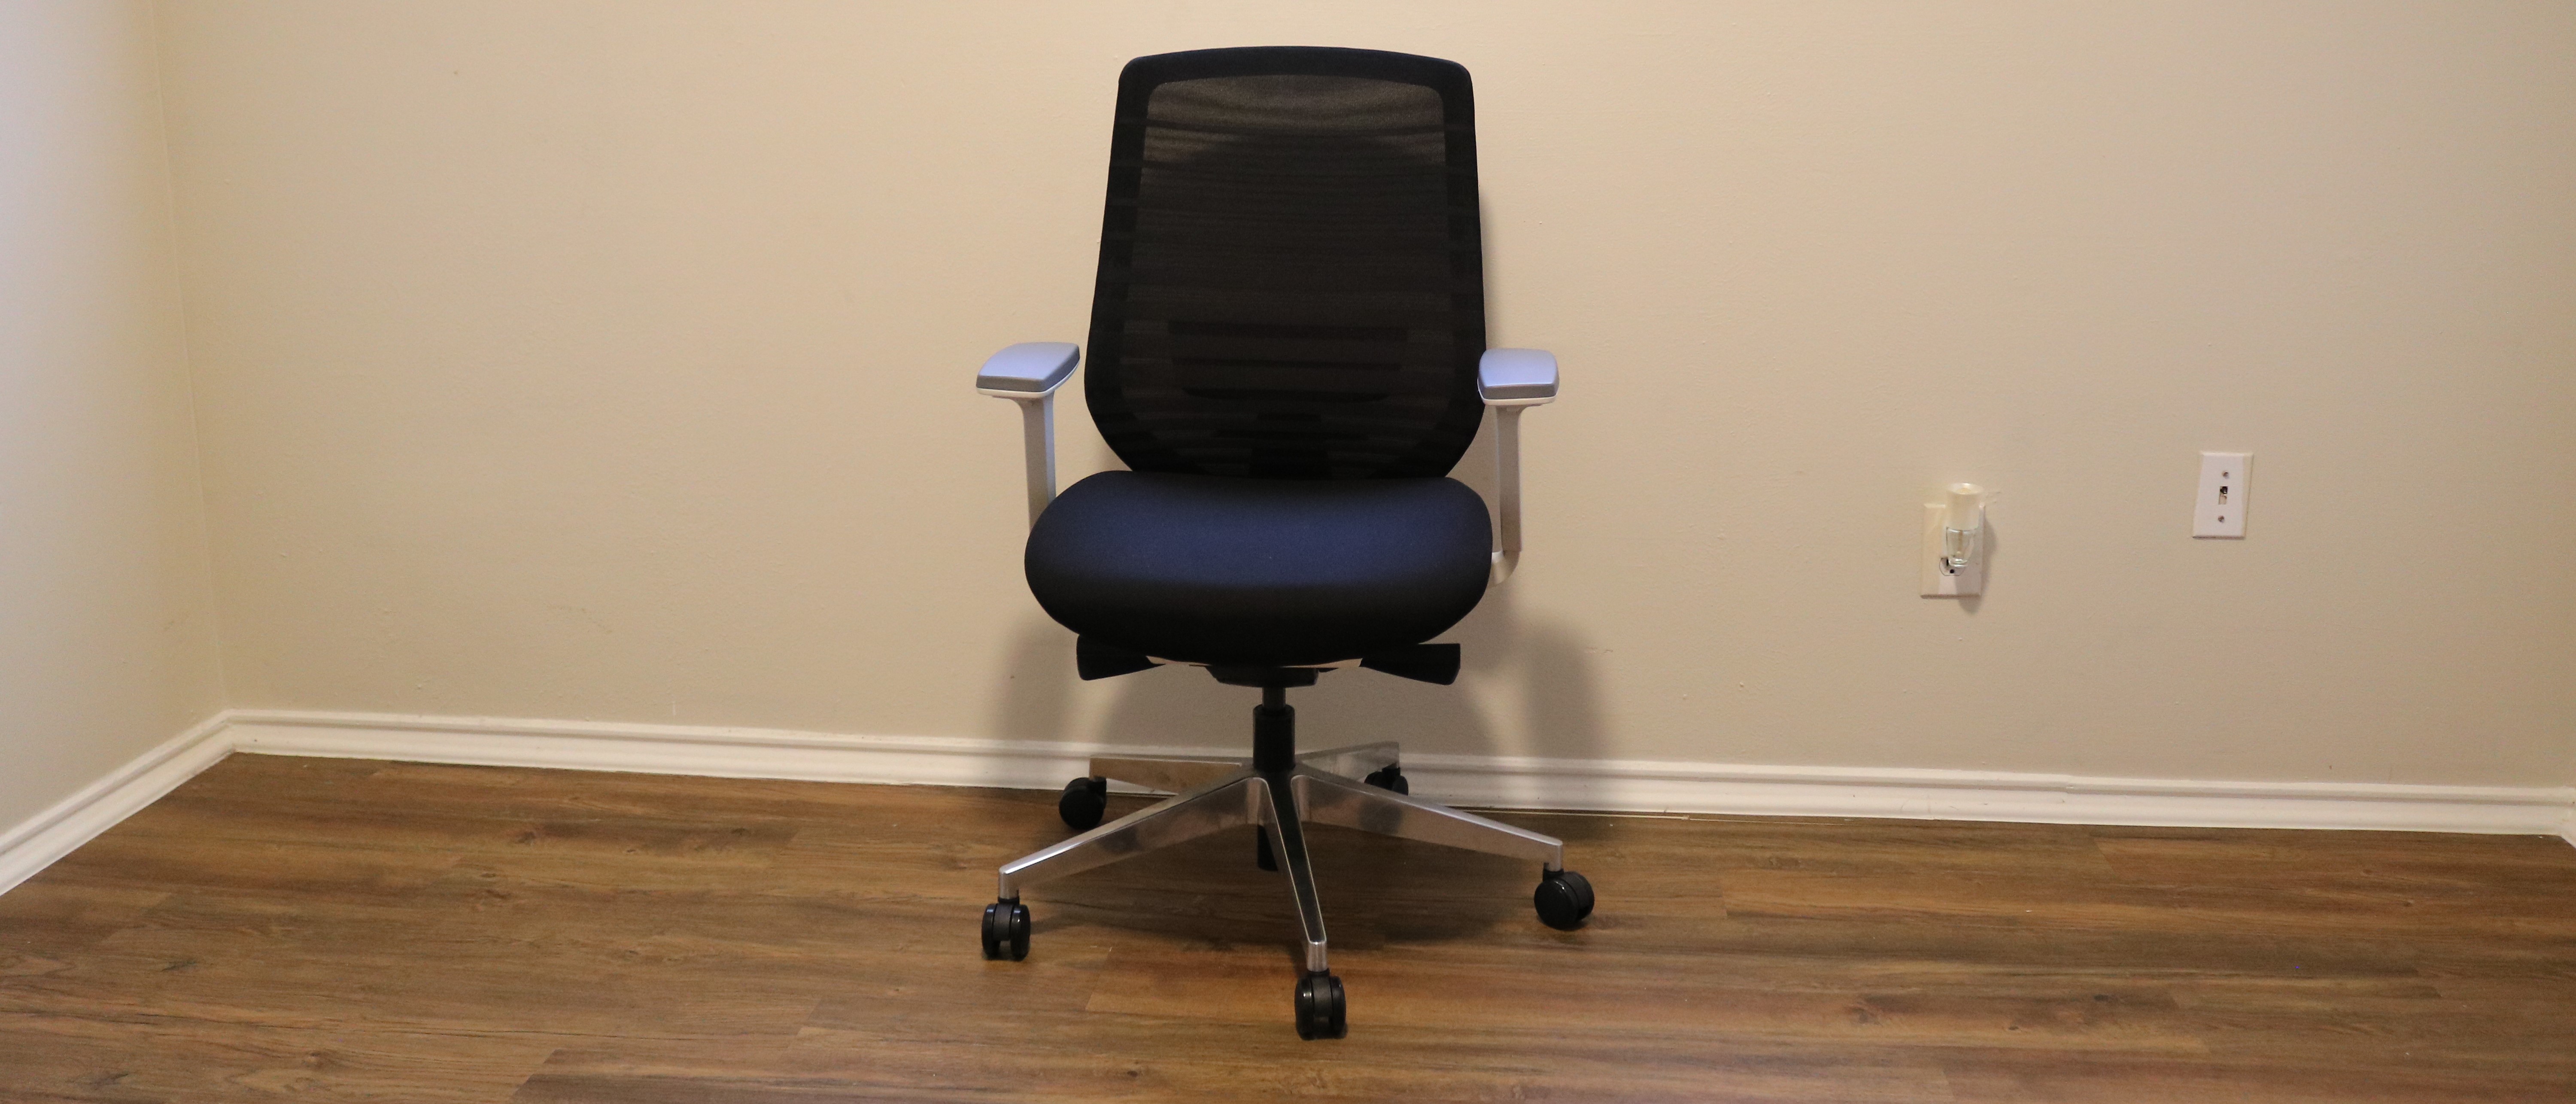 The title ofElevate Your Workday with These Best Office Chairs for